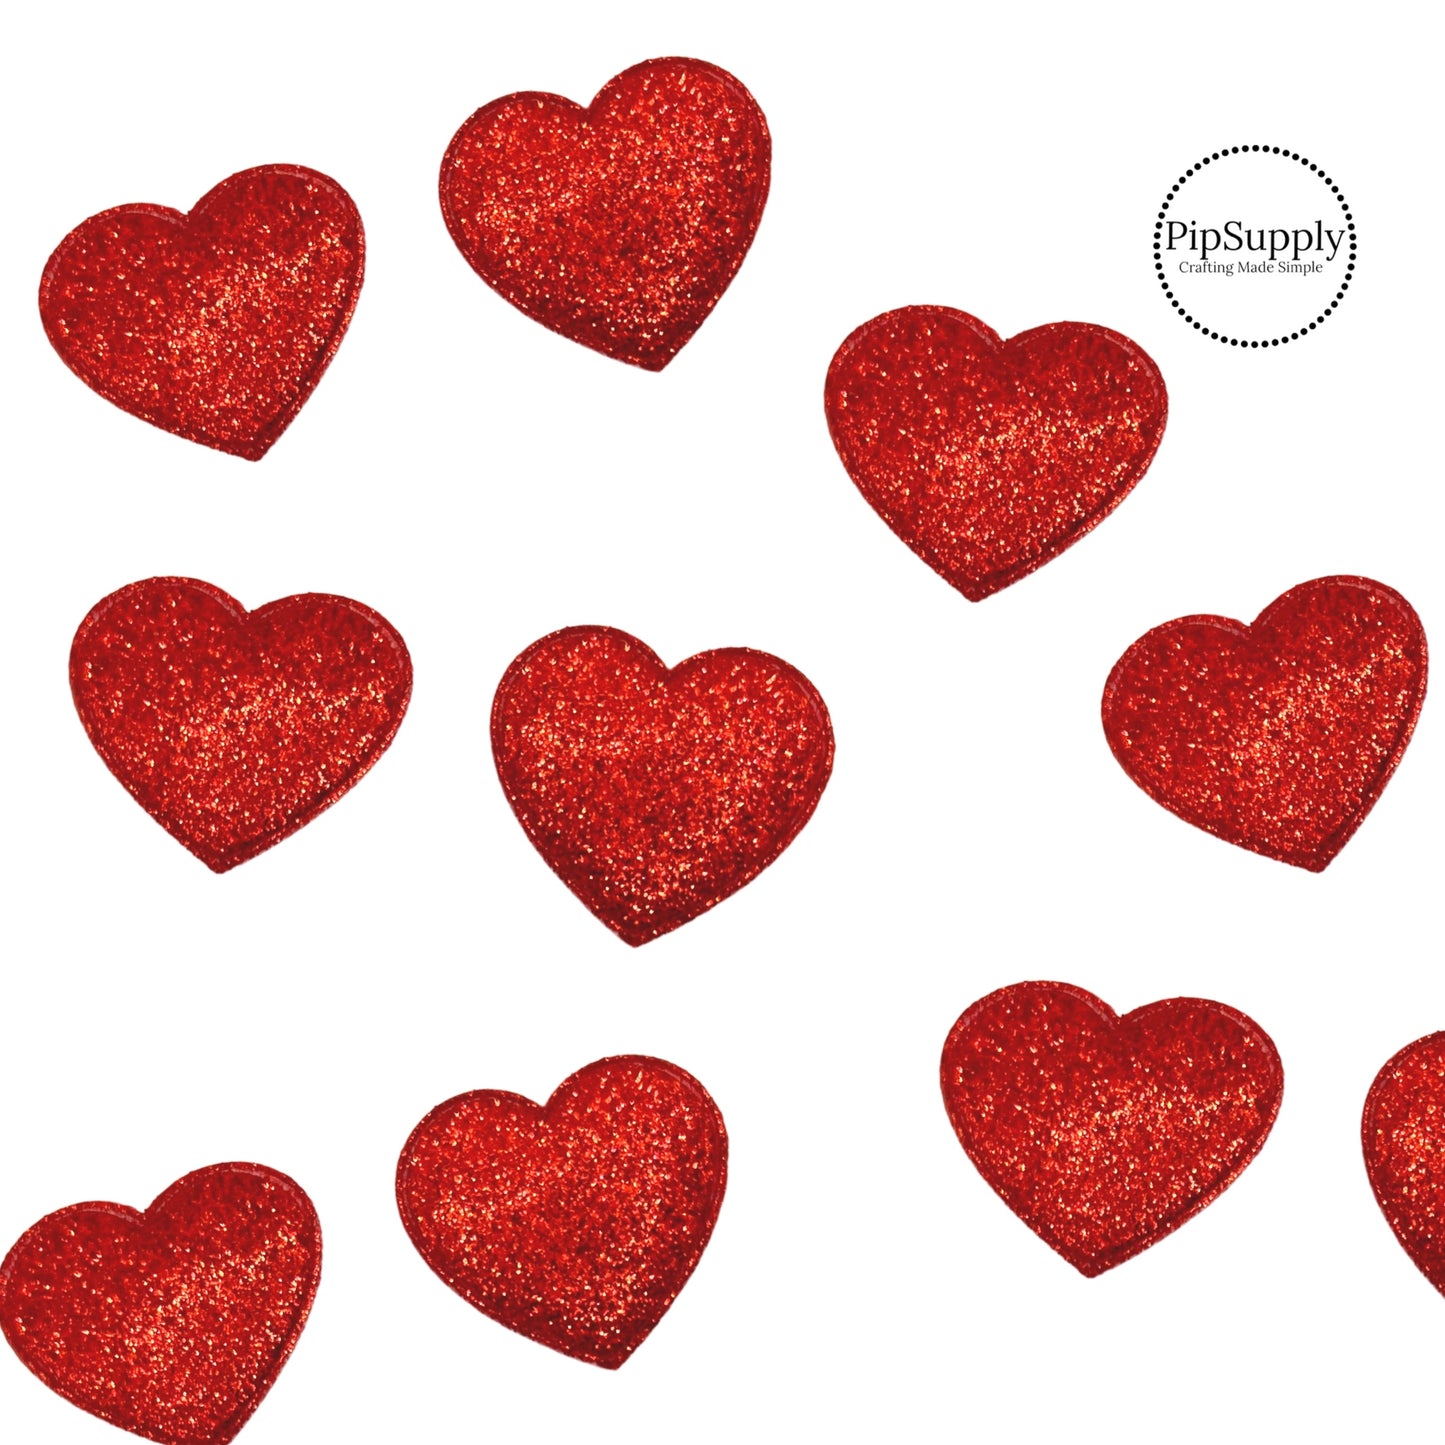 red shimmer glitter padded hearts about one and a quarter inches wide with fabric backing for crafting